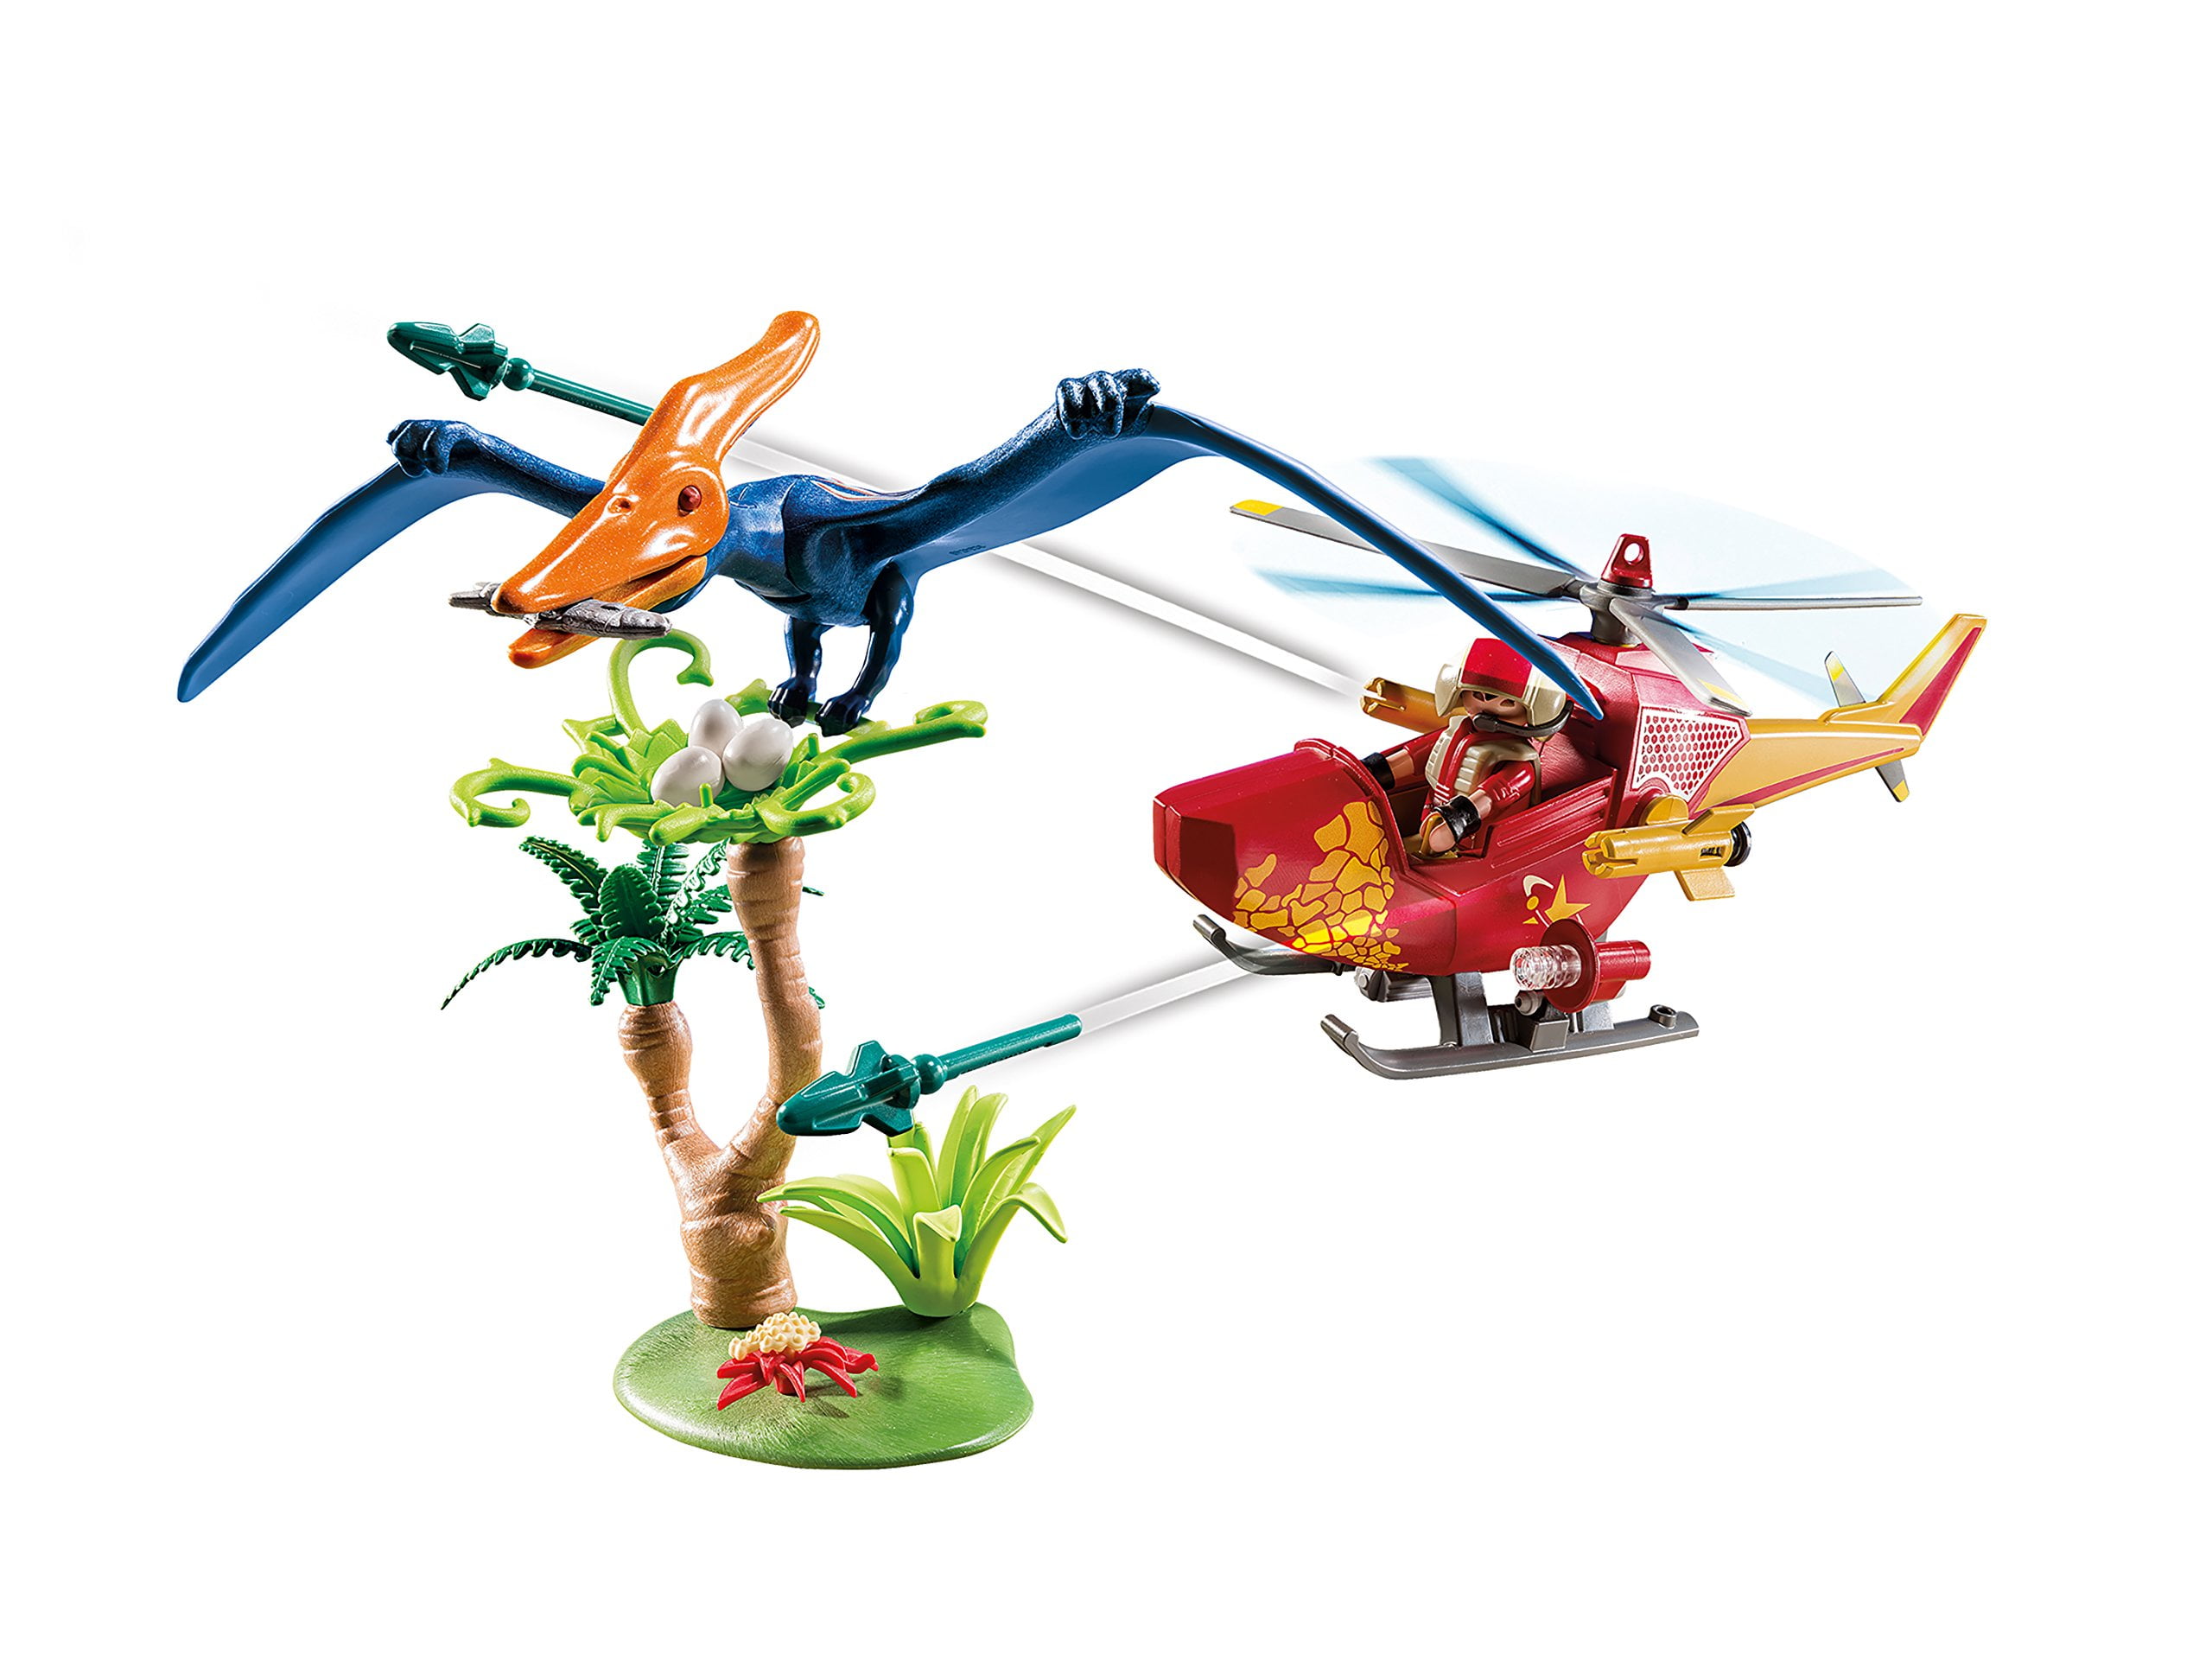 fireplace Melting promotion PLAYMOBIL Adventure Copter with Pterodactyl - Walmart.com